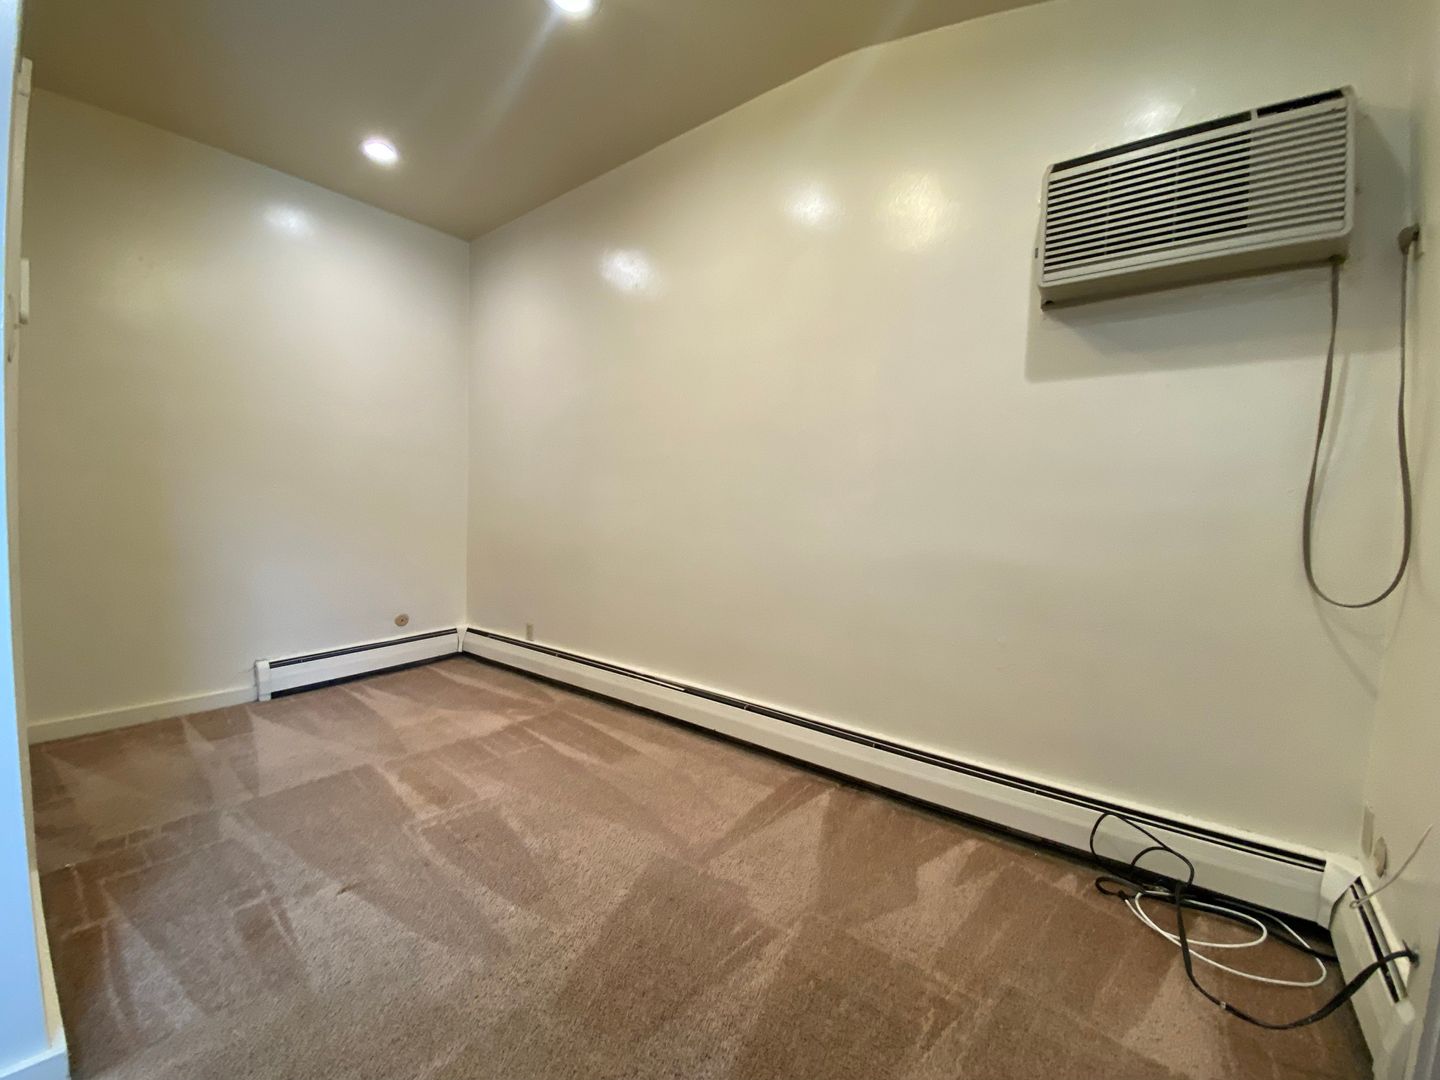 Affordable Studio on Meyran Avenue! Great Oakland Location! Call Today!